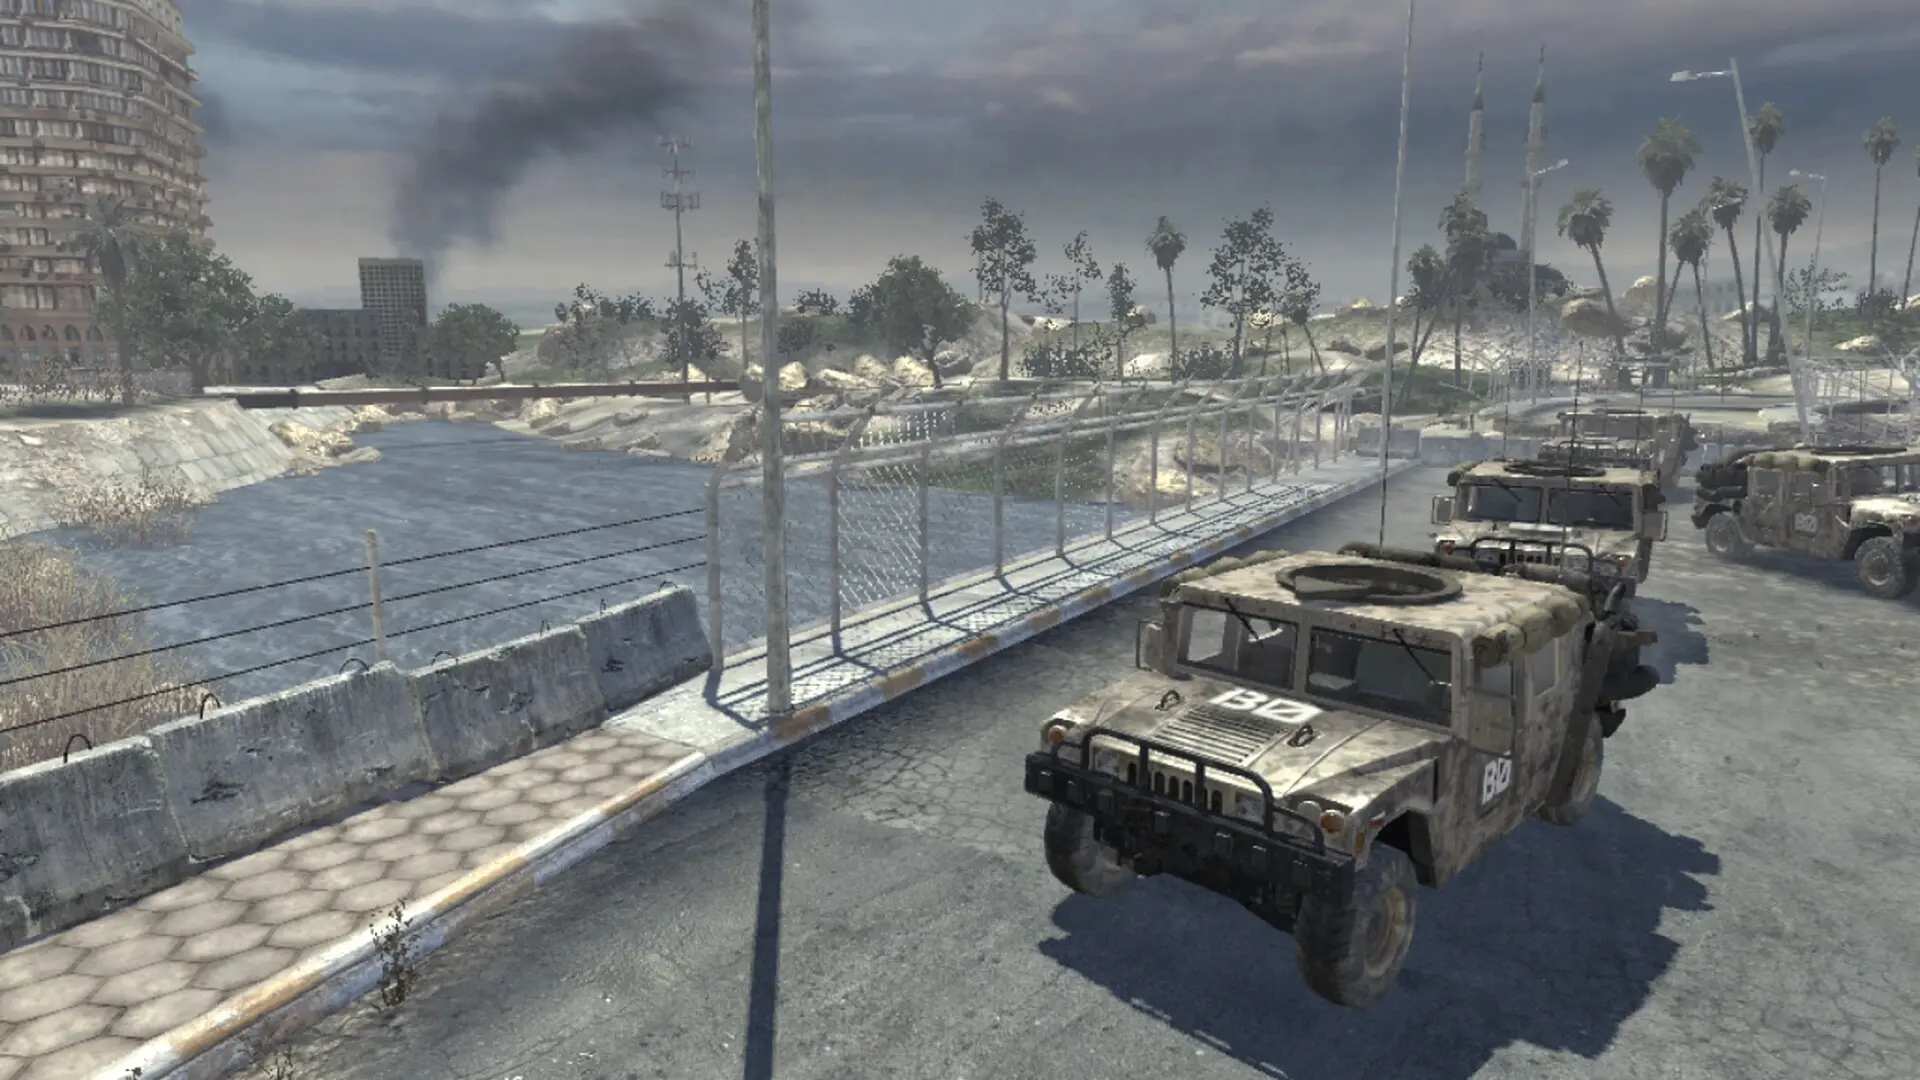 Modern Warfare 2 map with exploding cars divides community